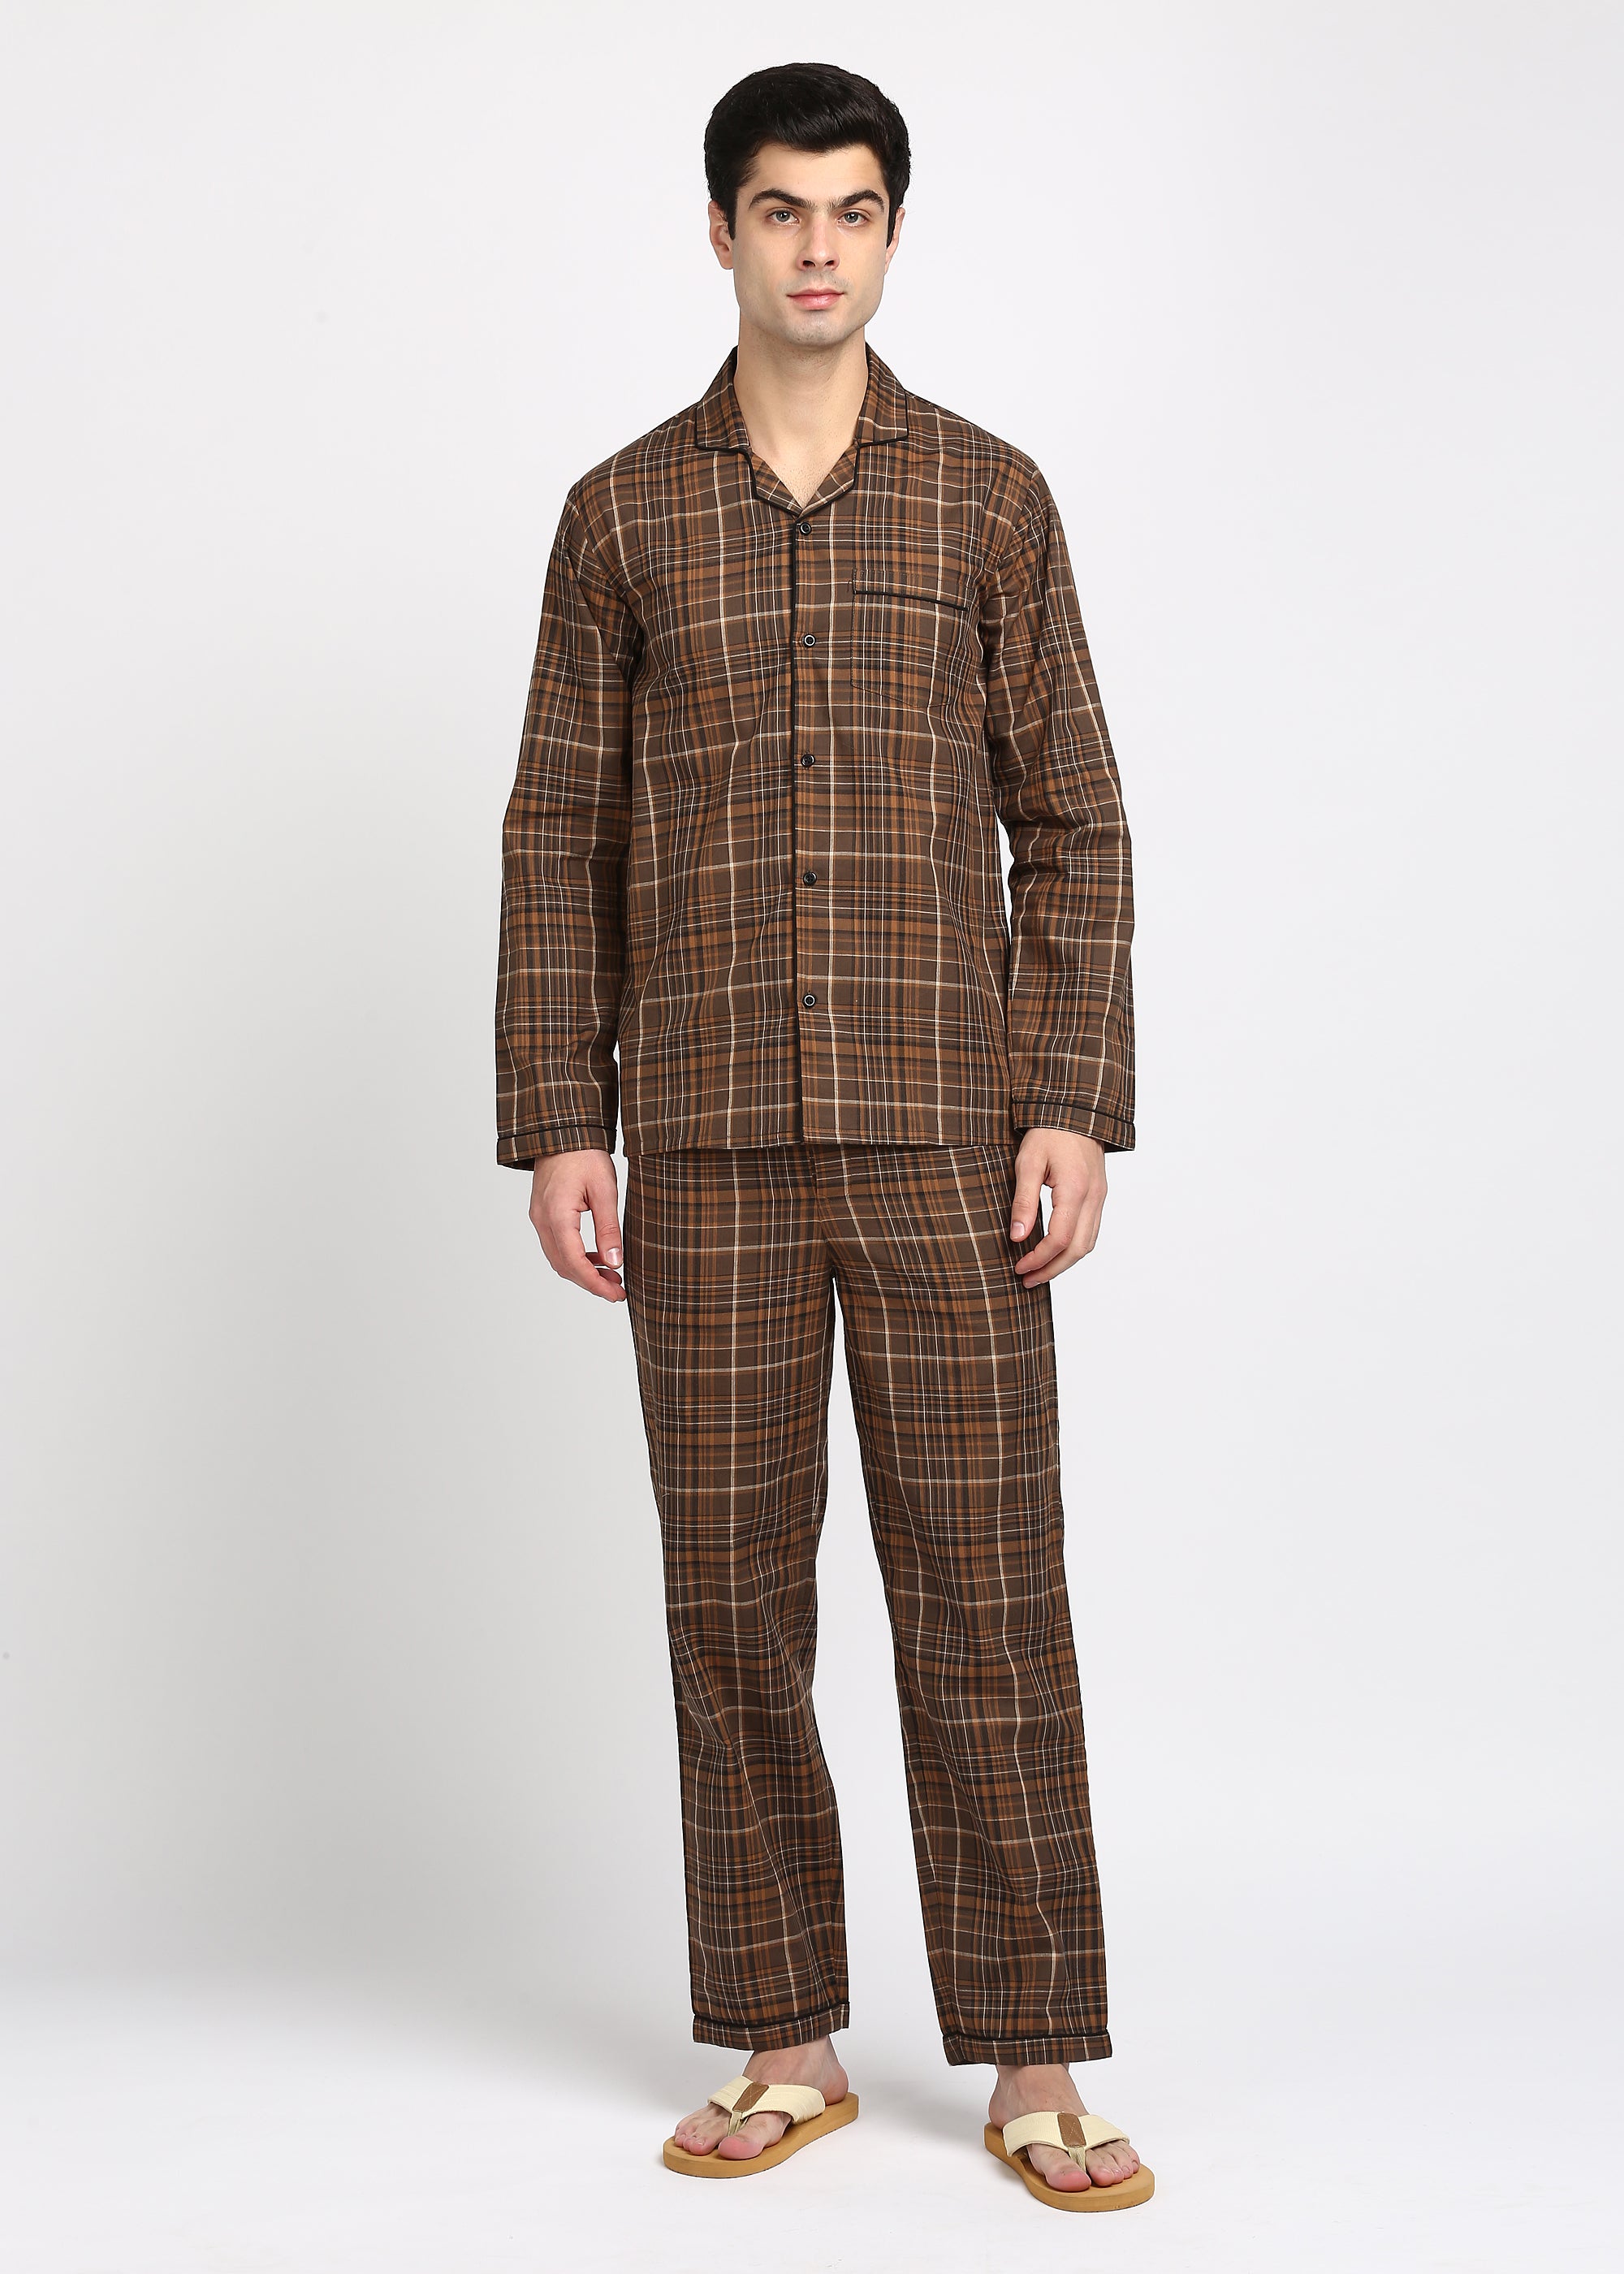 Brown and Black Checkered Long Sleeve Men's Night Suit - Shopbloom